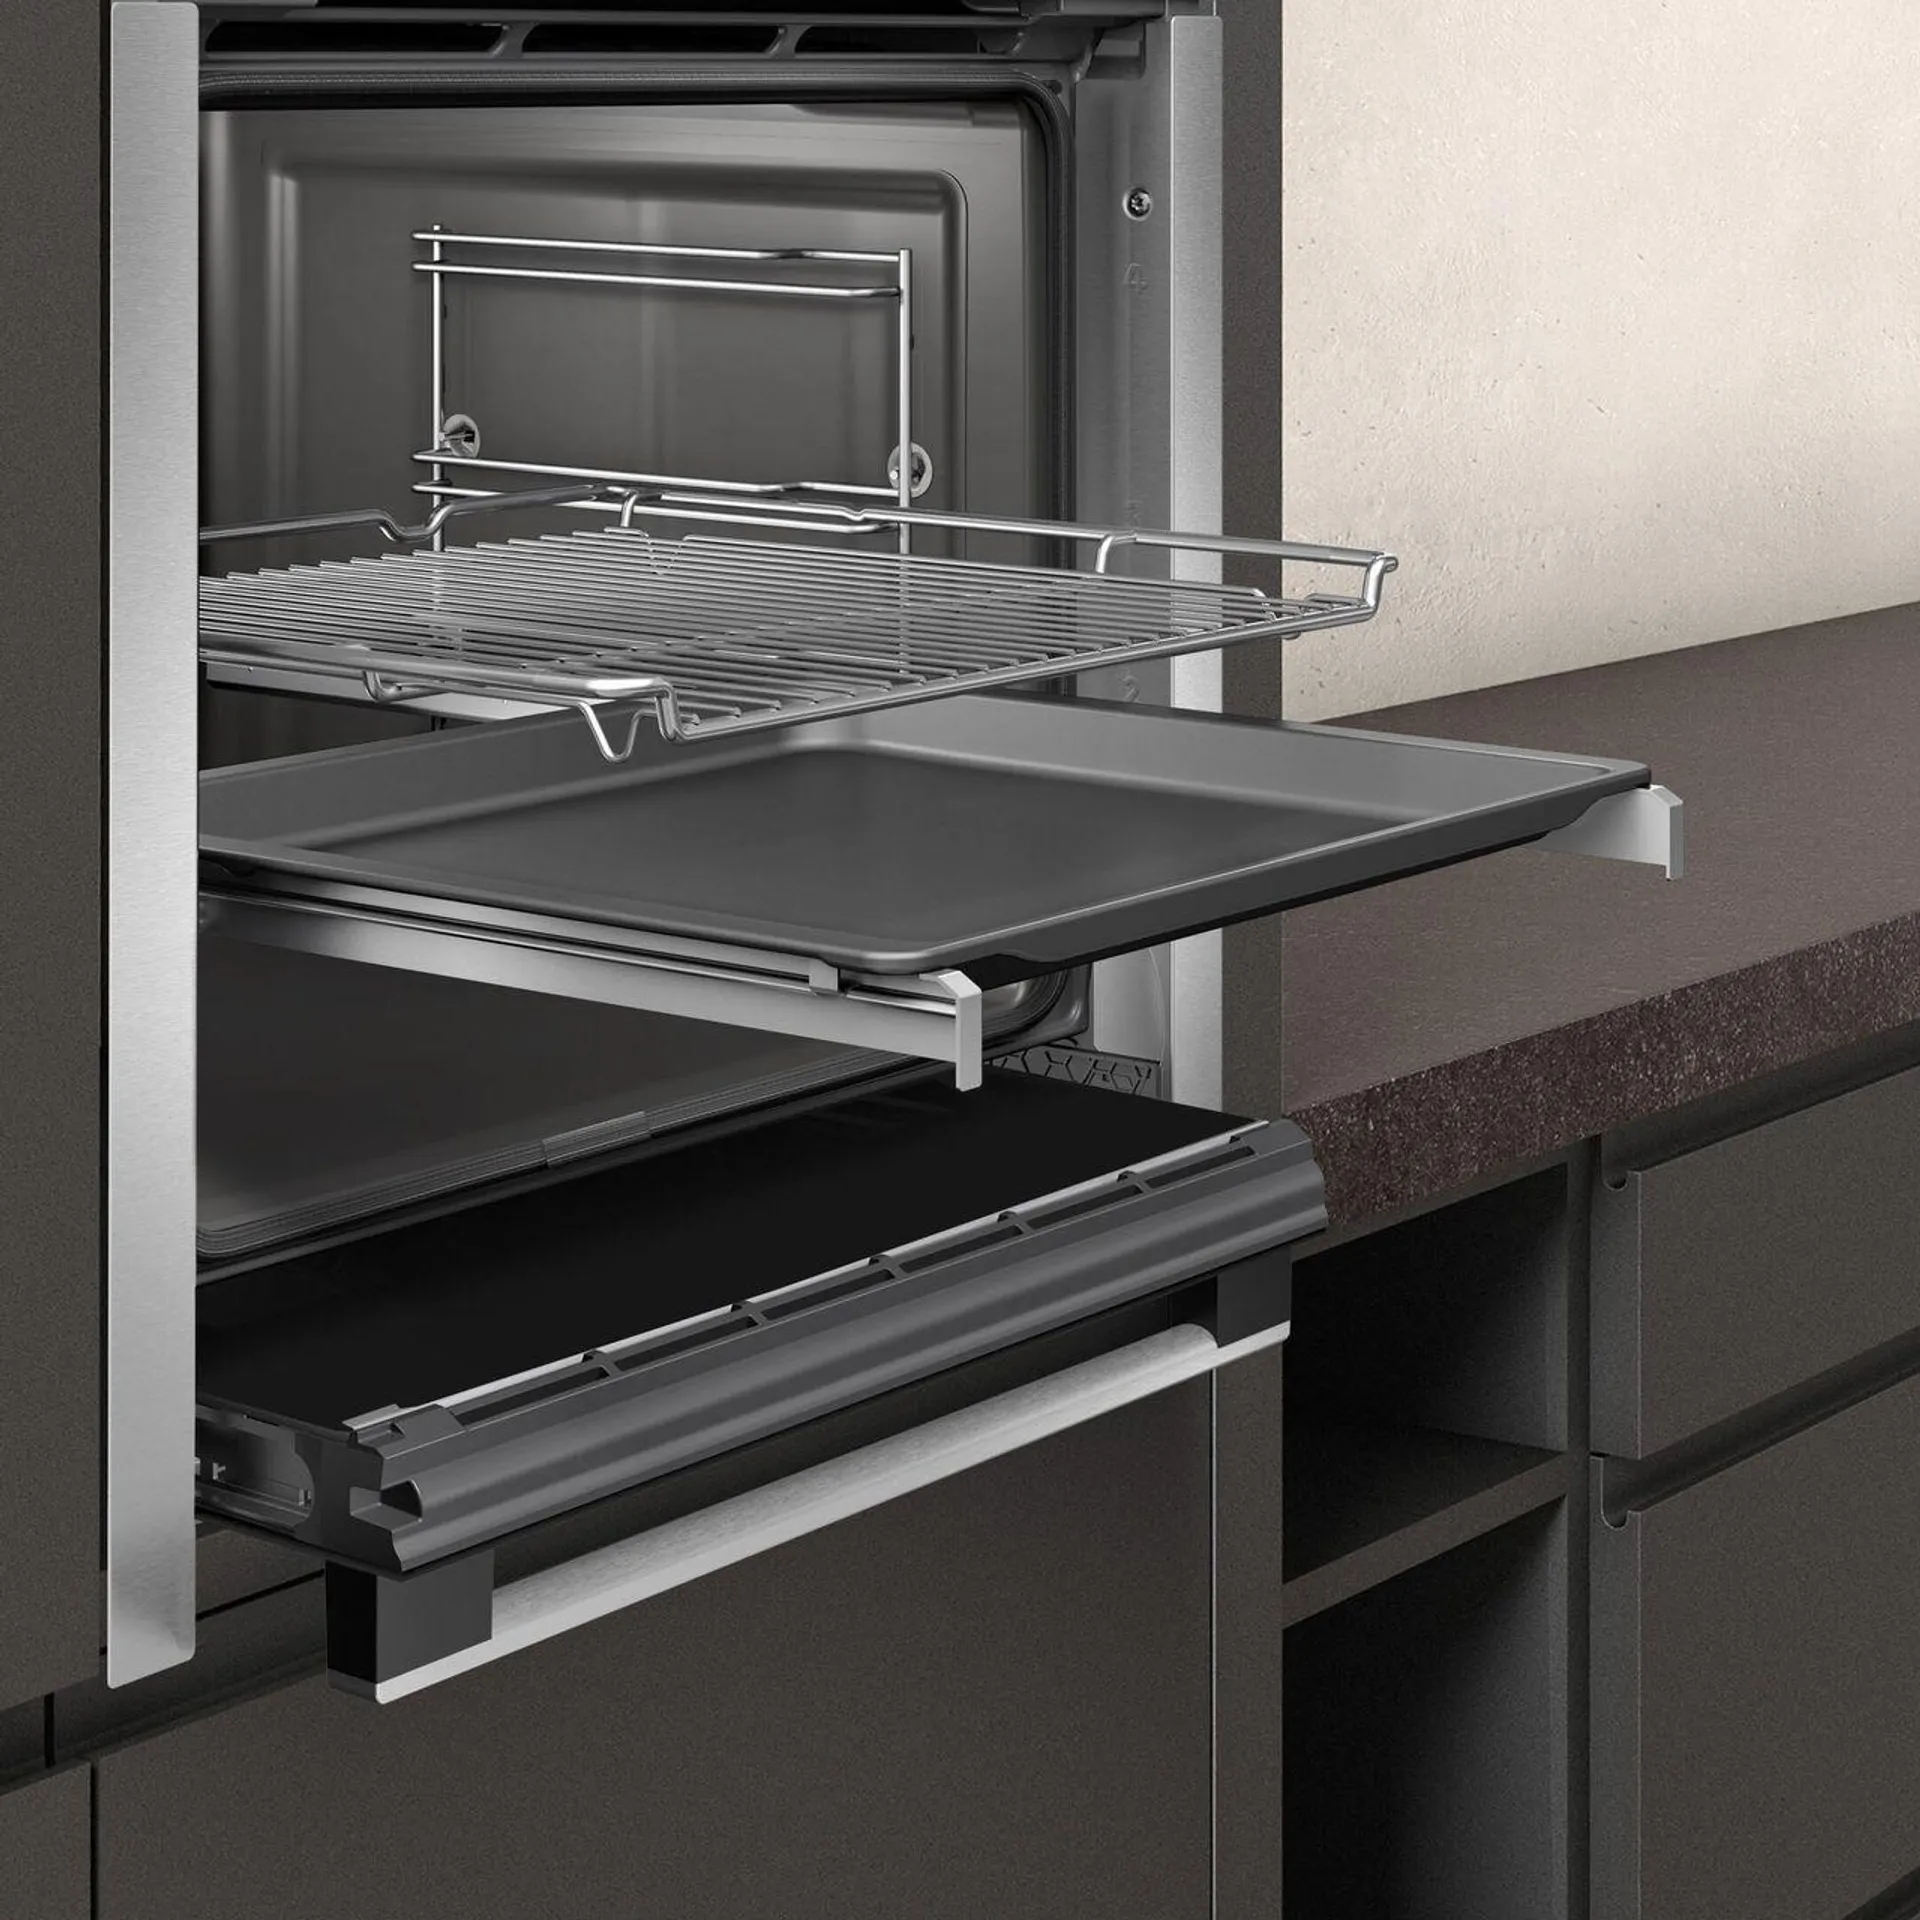 NEFF N50 Slide&Hide® B6ACH7HH0B Wifi Connected Built In Electric Single Oven - Stainless Steel - A Rated